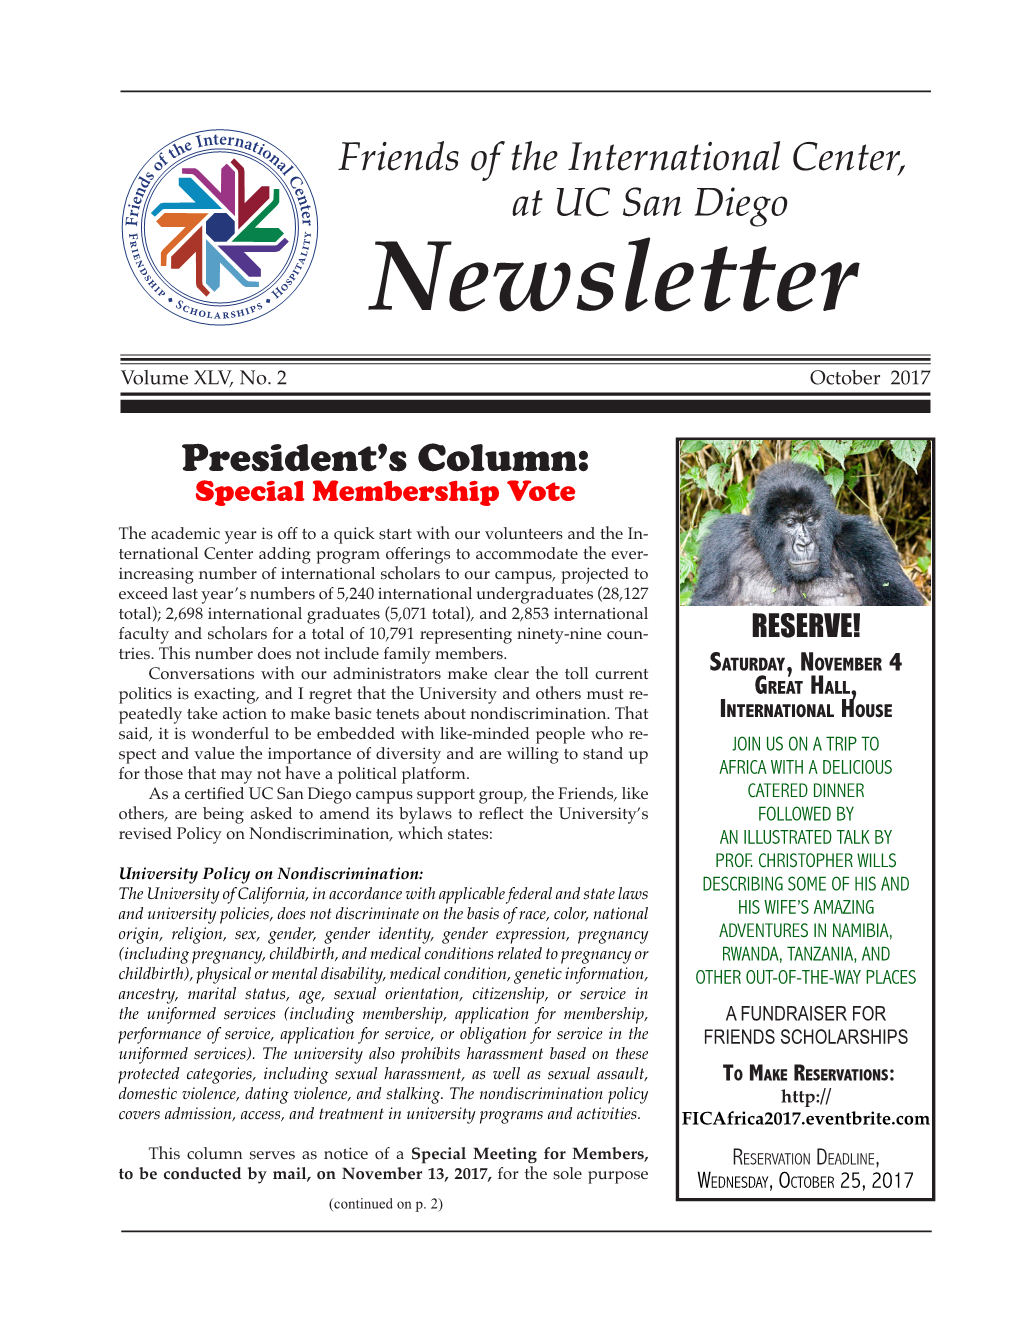 Friends of the International Center, at UC San Diego Newsletter